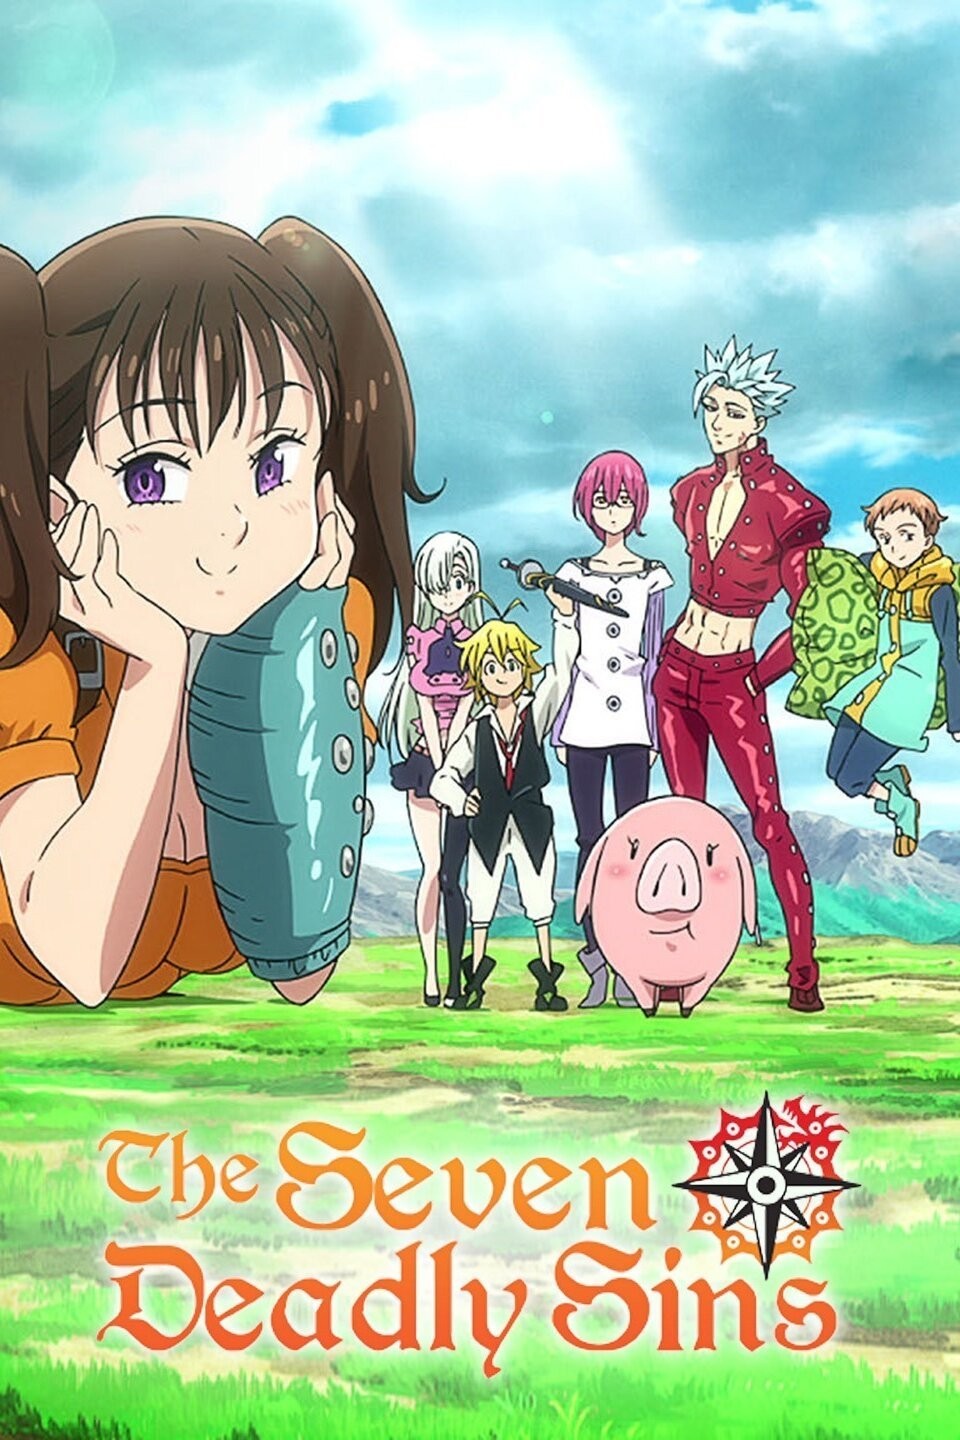 Seven Deadly Sins: Complete watch order of anime and movies